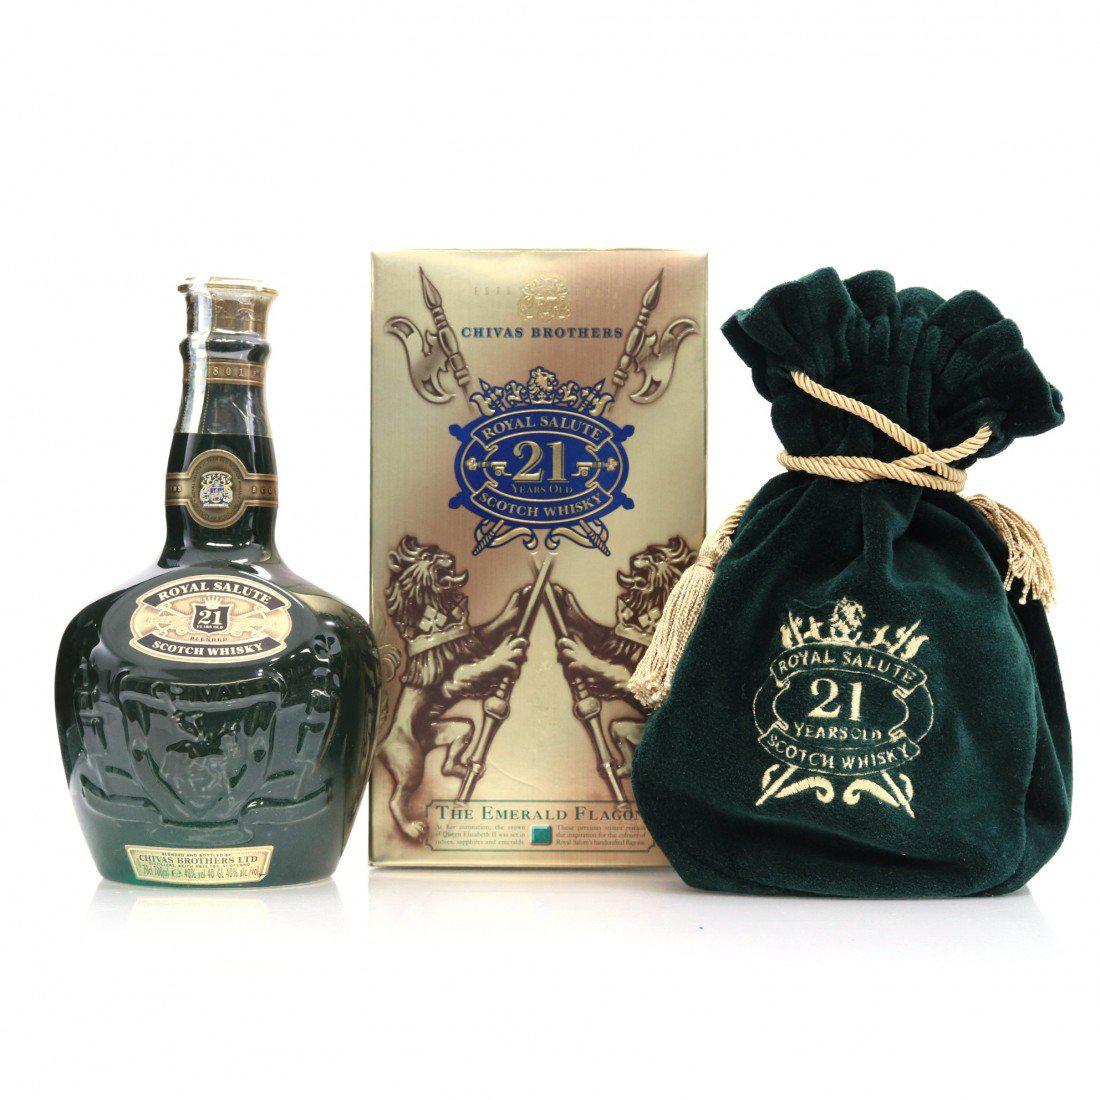 Chivas Regal Royal Salute 21 Years Old (Emerald Flagon) 700ml Limited Edition